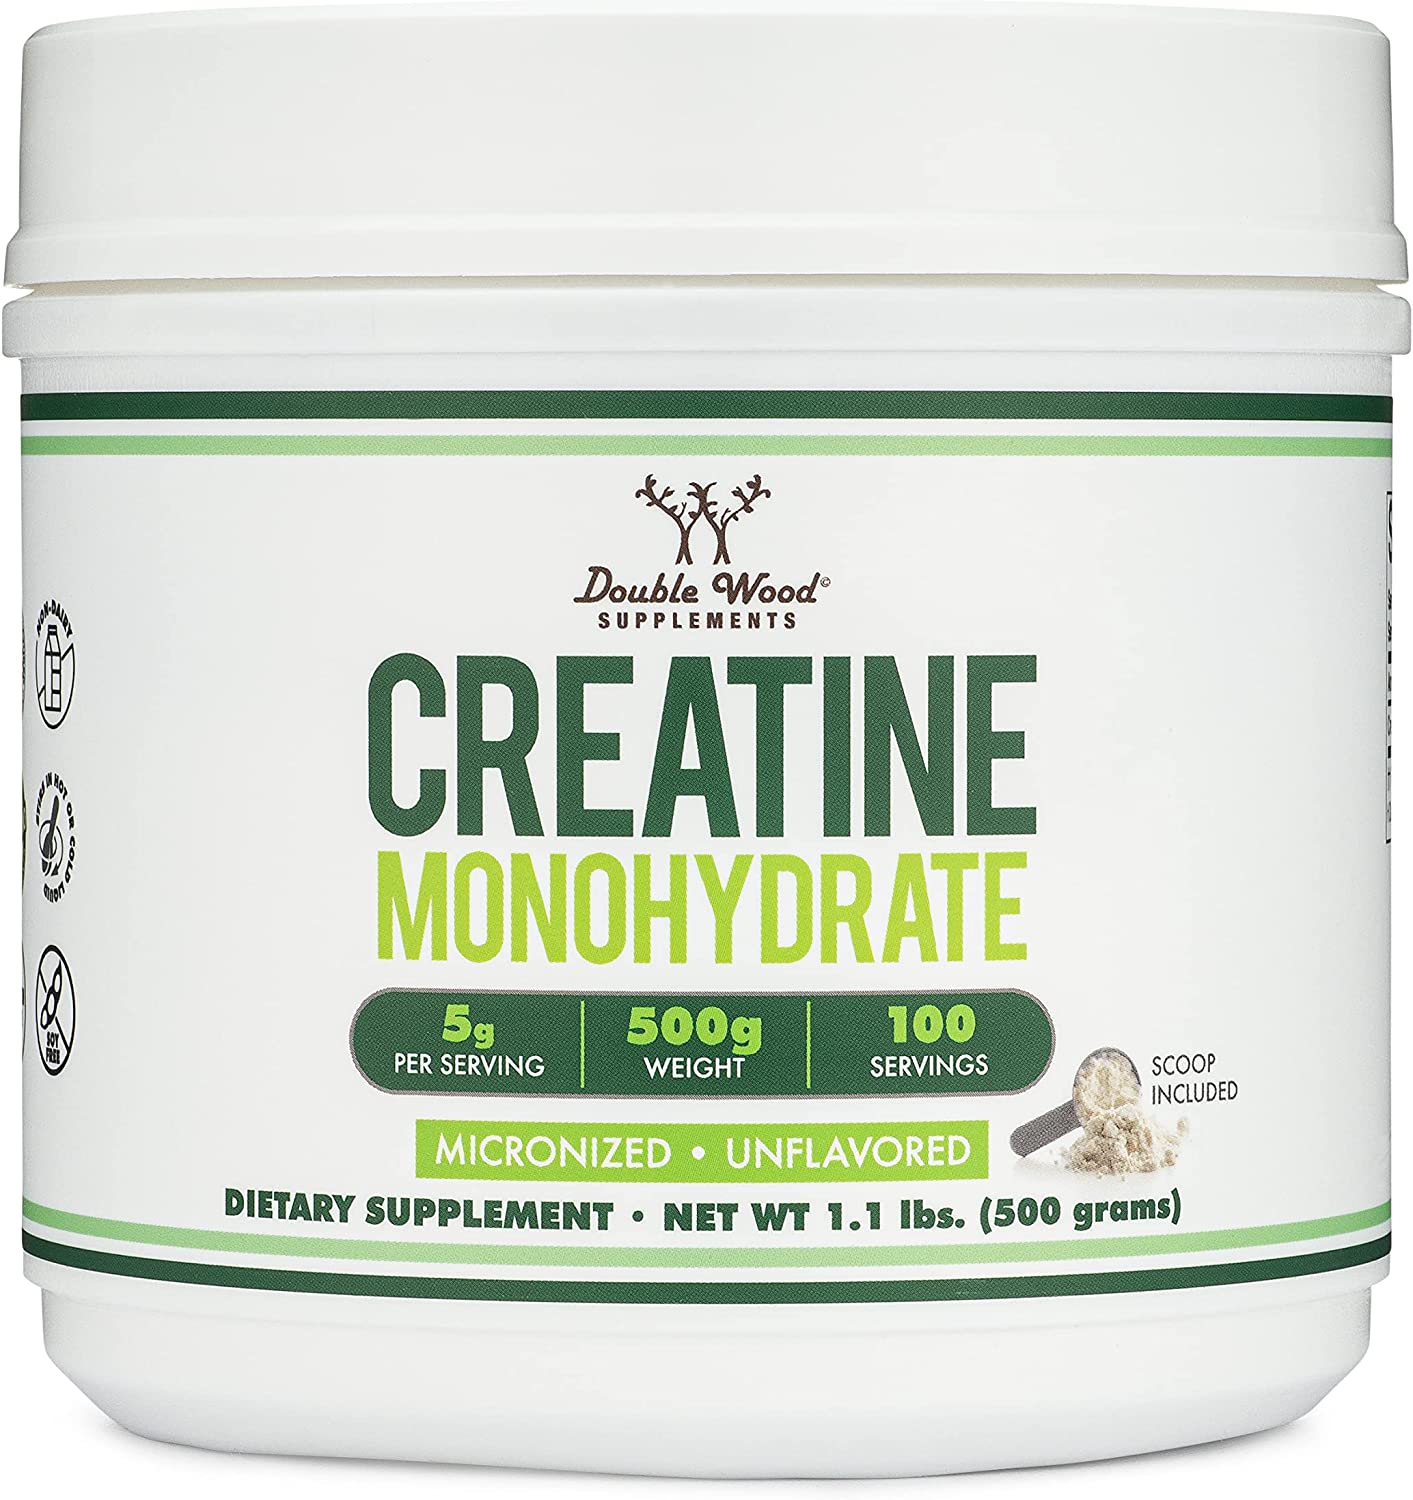  Double Wood Creatine Monohydrate Powder (Unflavored)